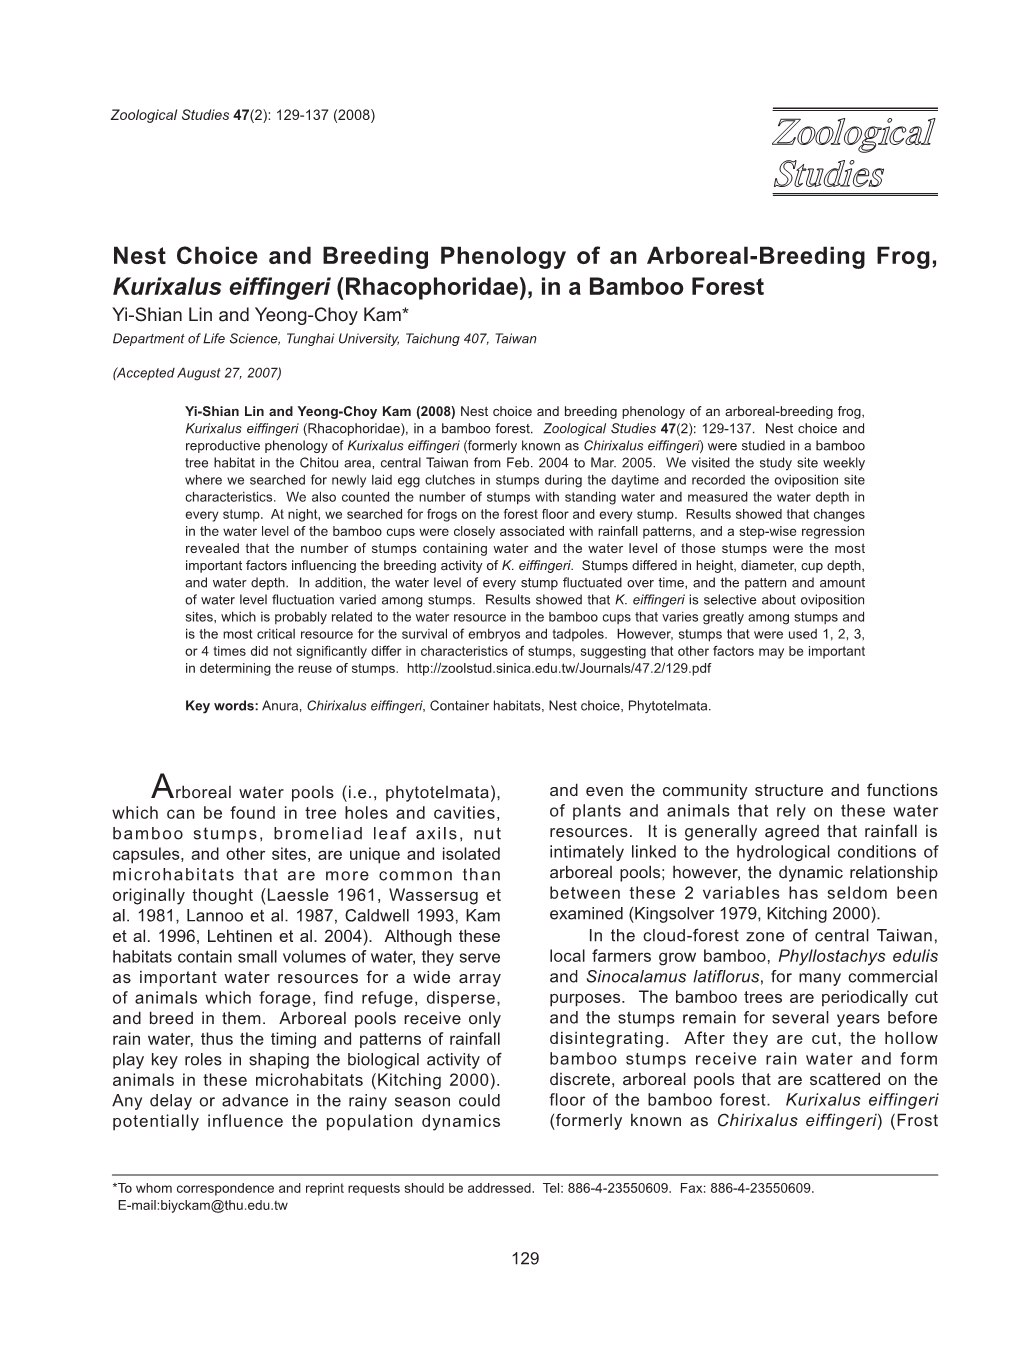 Nest Choice and Breeding Phenology of an Arboreal-Breeding Frog